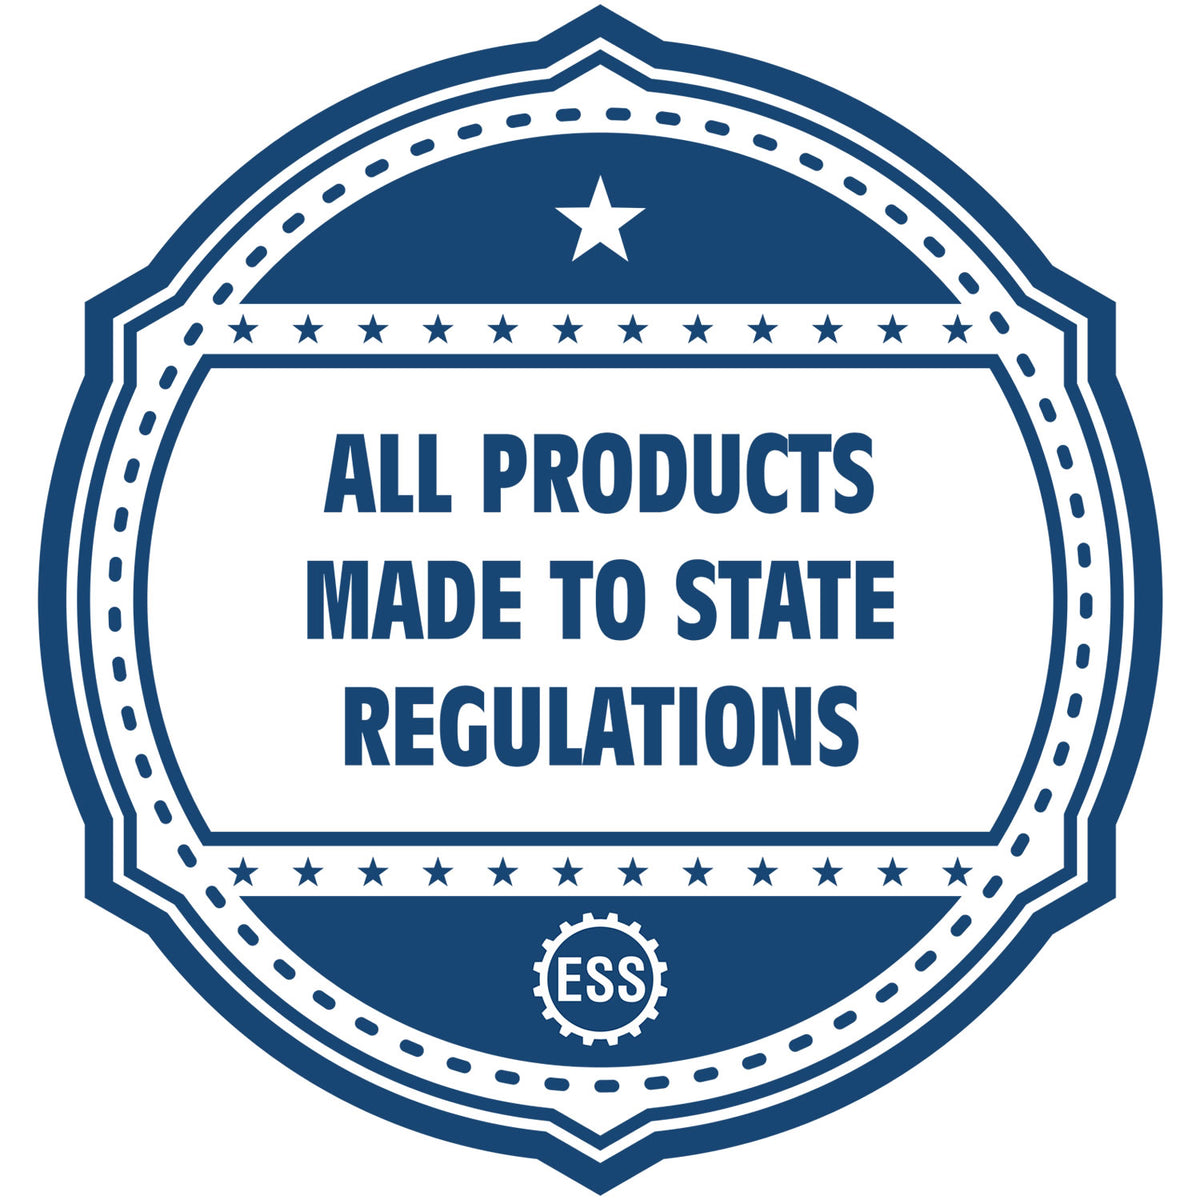 An icon or badge element for the Handheld Michigan Architect Seal Embosser showing that this product is made in compliance with state regulations.